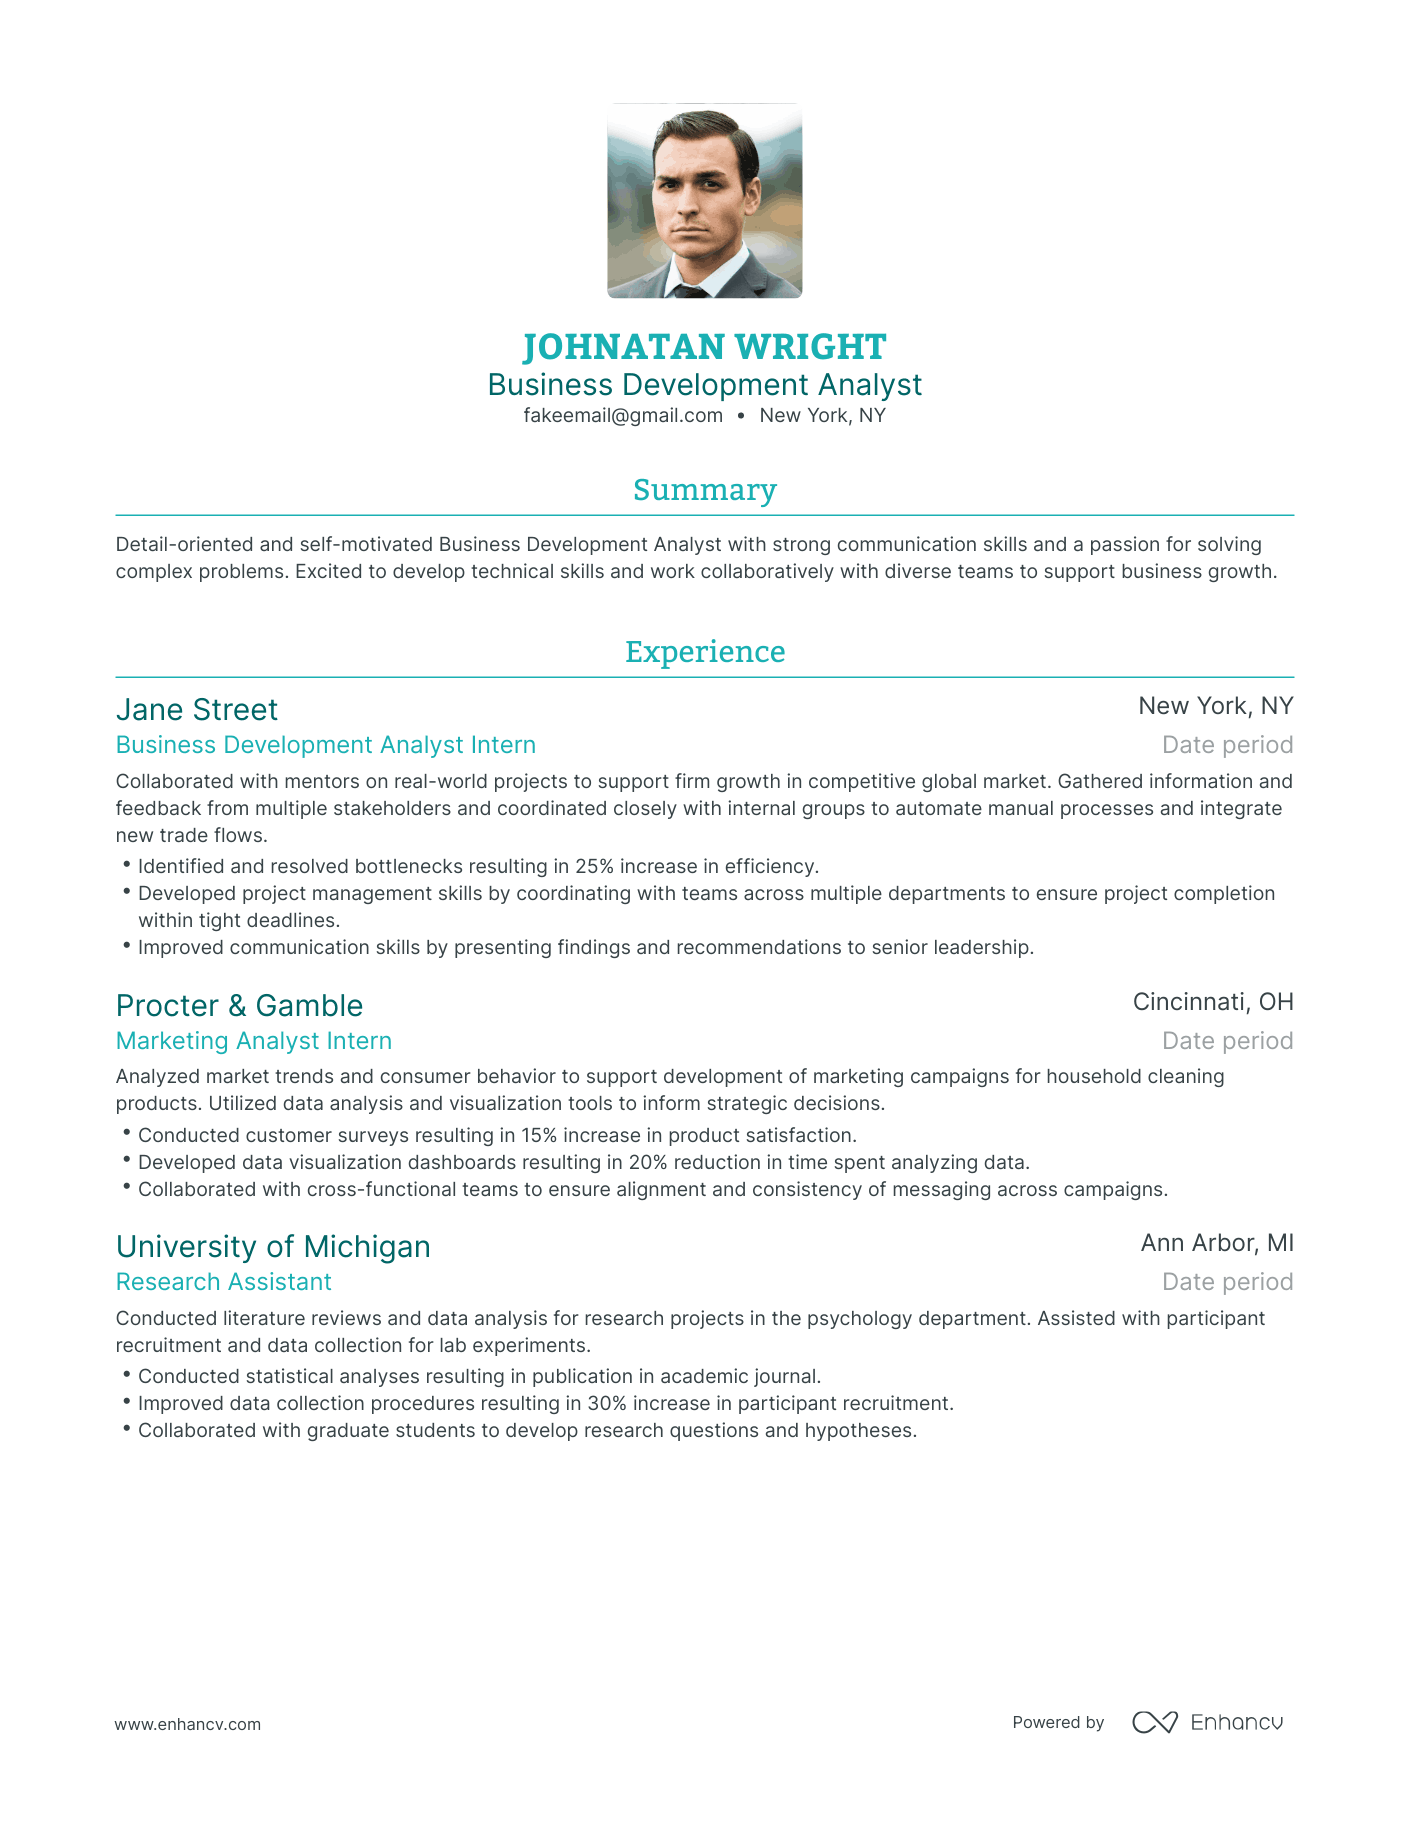 Traditional Business Development Analyst Resume Template